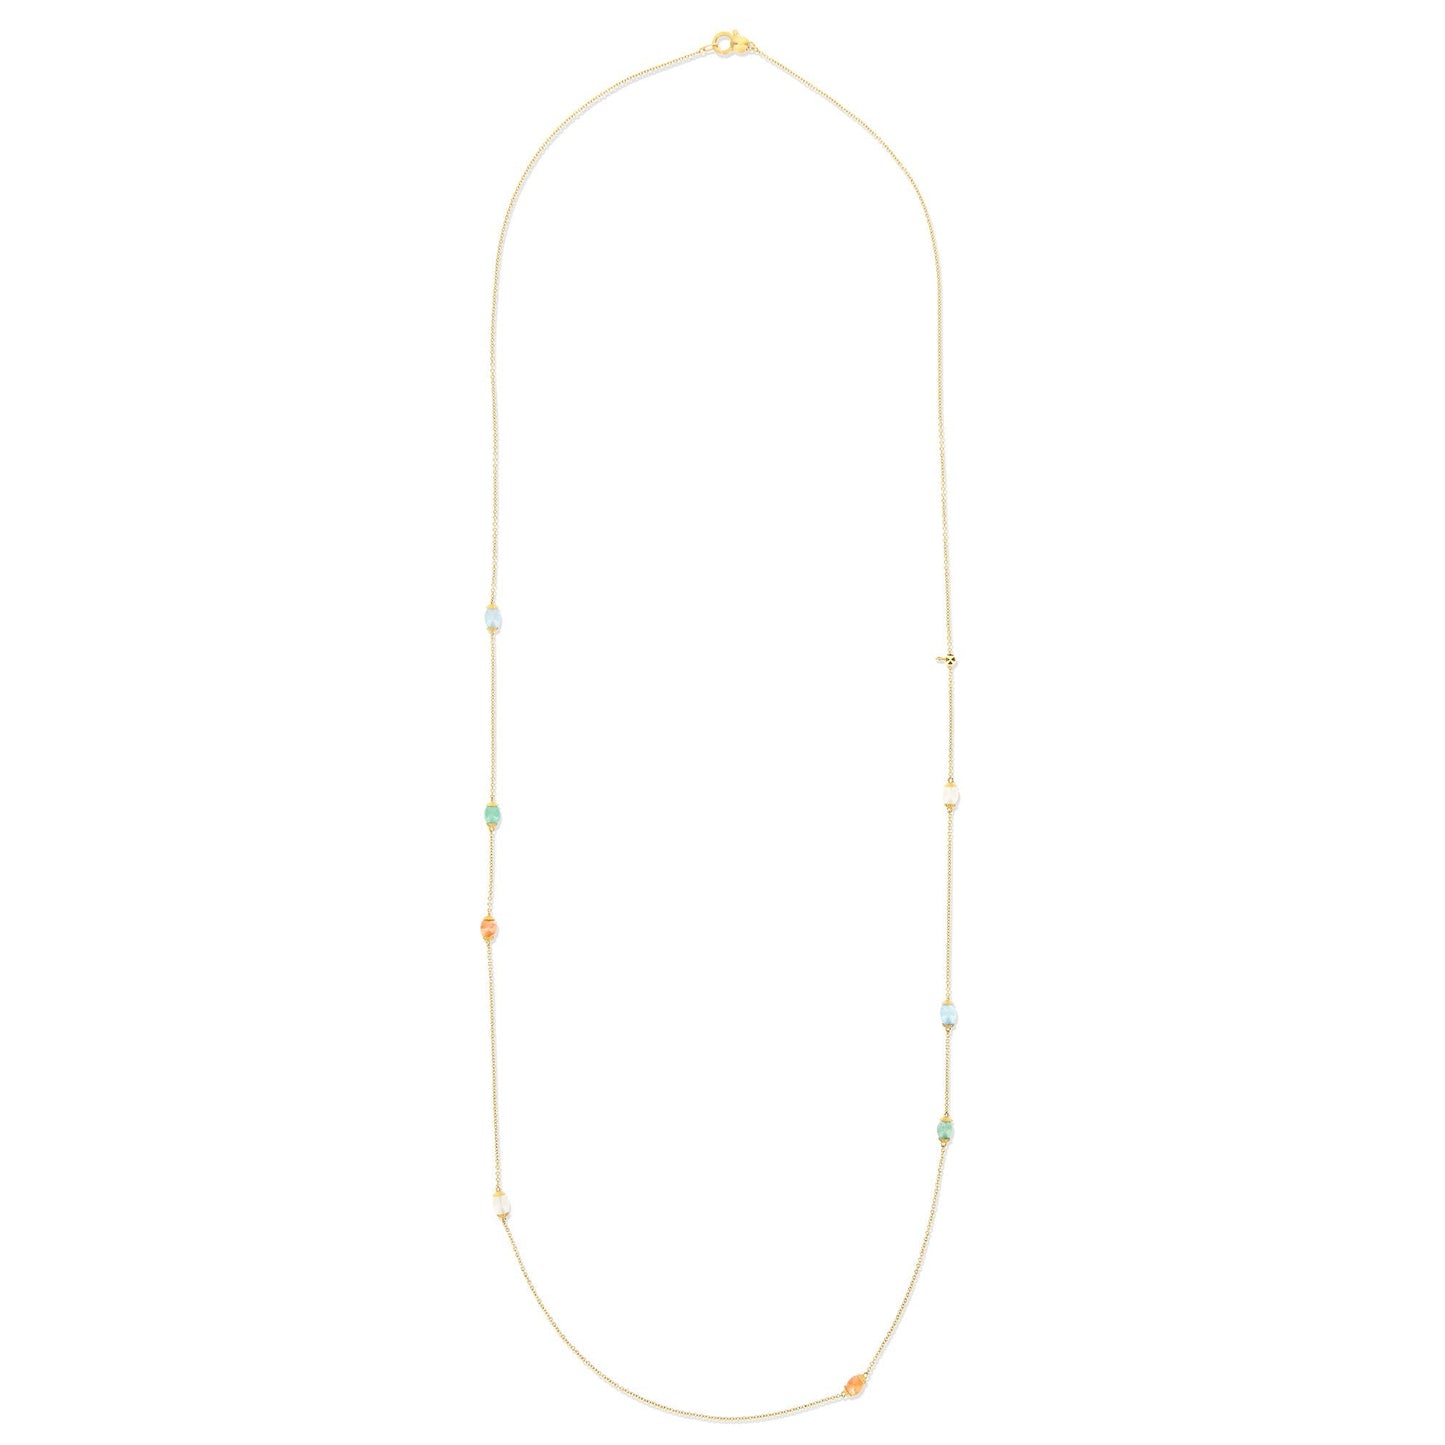 RAINBOW "AMULETS" GOLD AND NATURAL STONES CONVERTIBLE NECKLACE (LARGE)